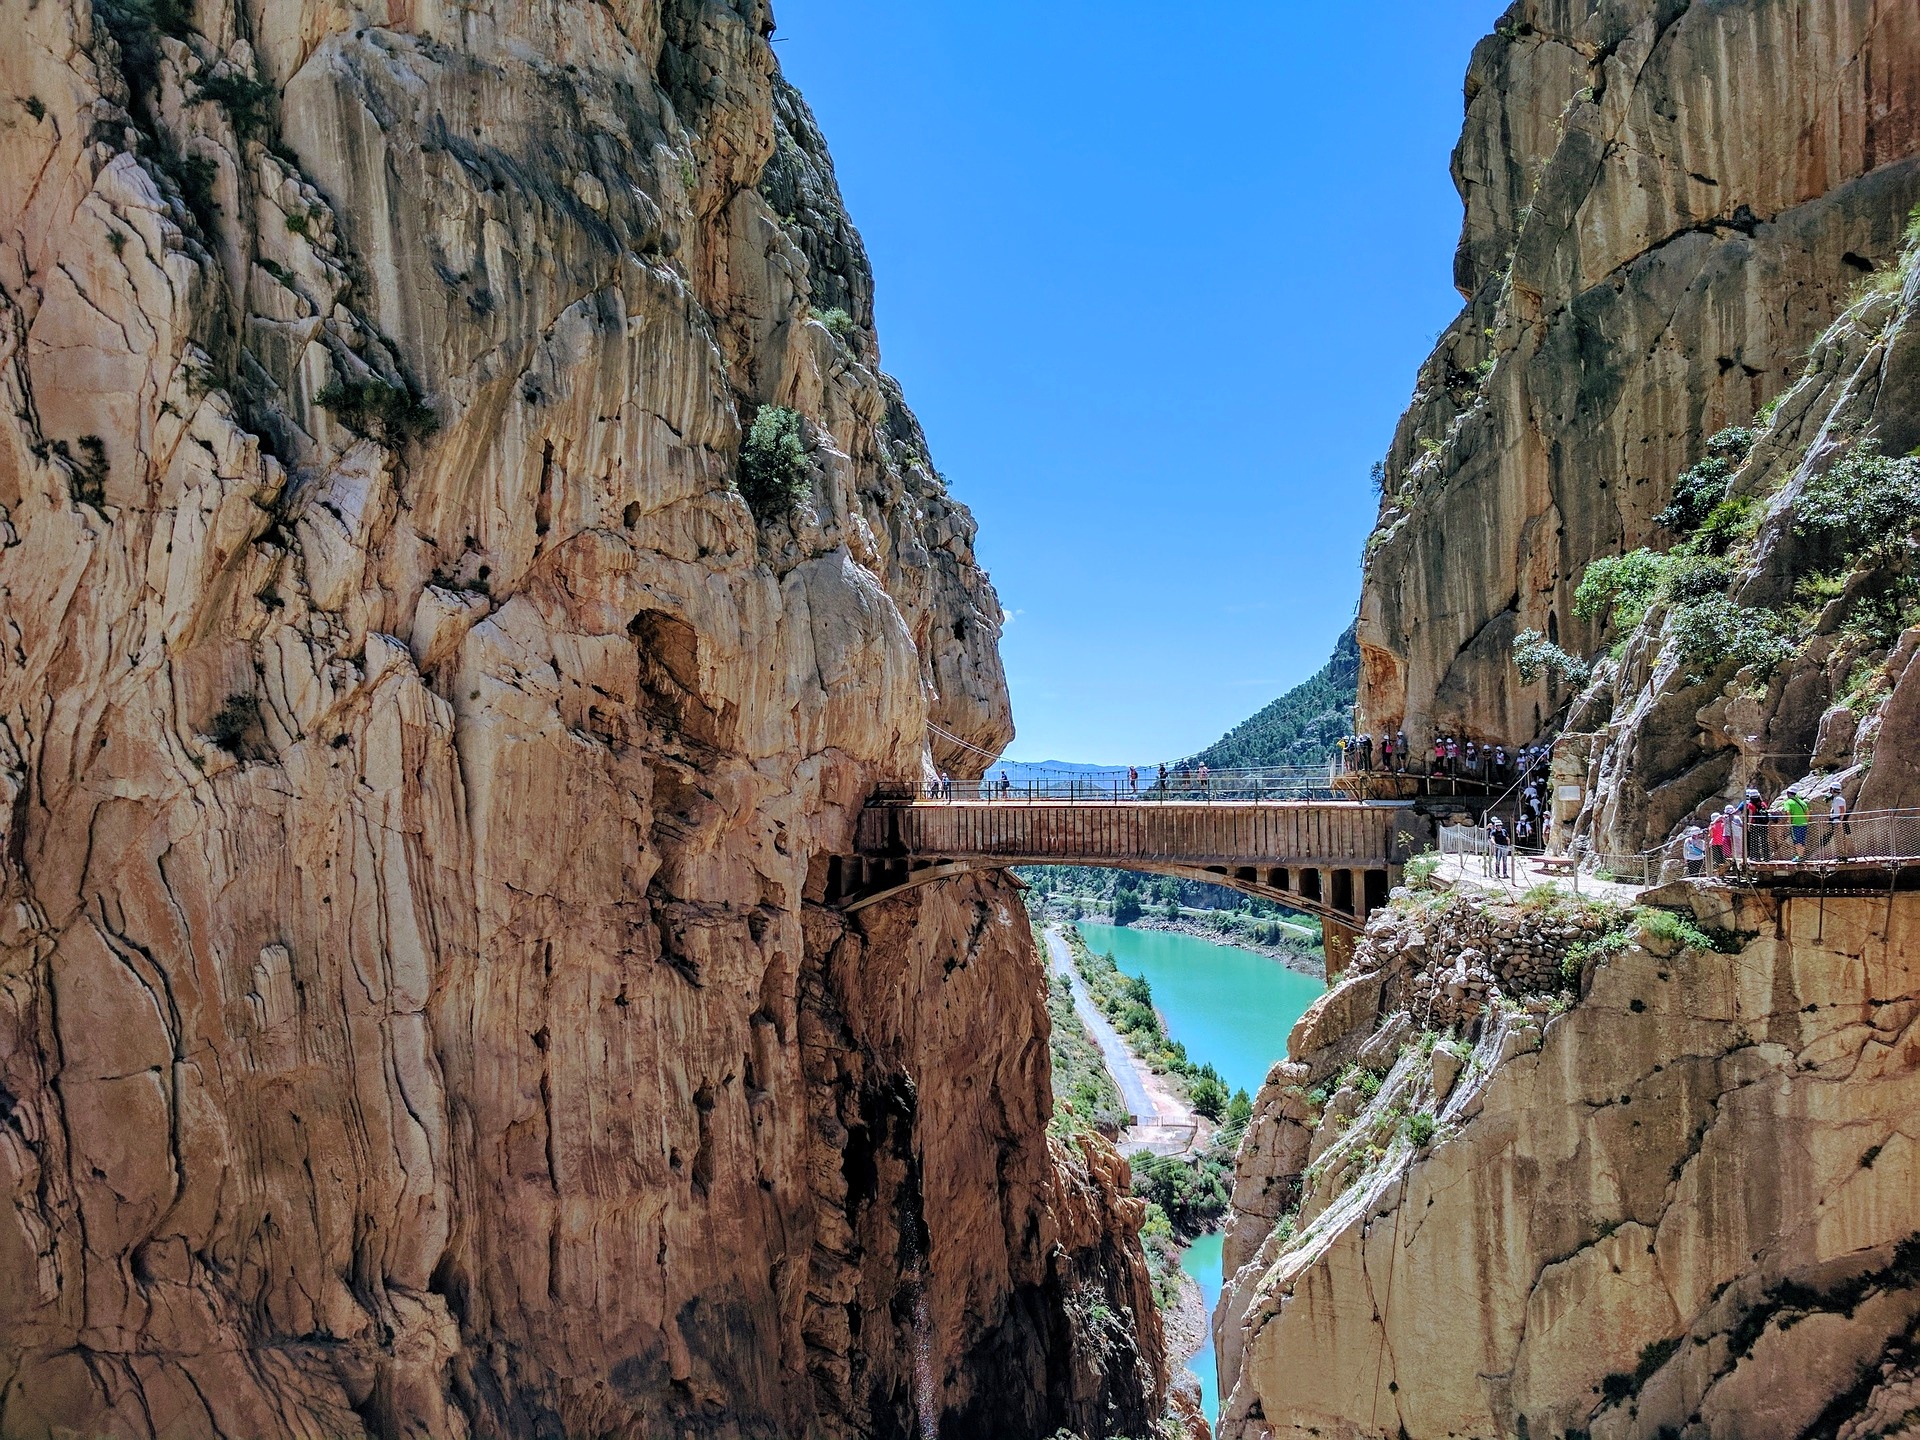 How to get tickets for the Caminito del Rey – The King’s Little Pathway?